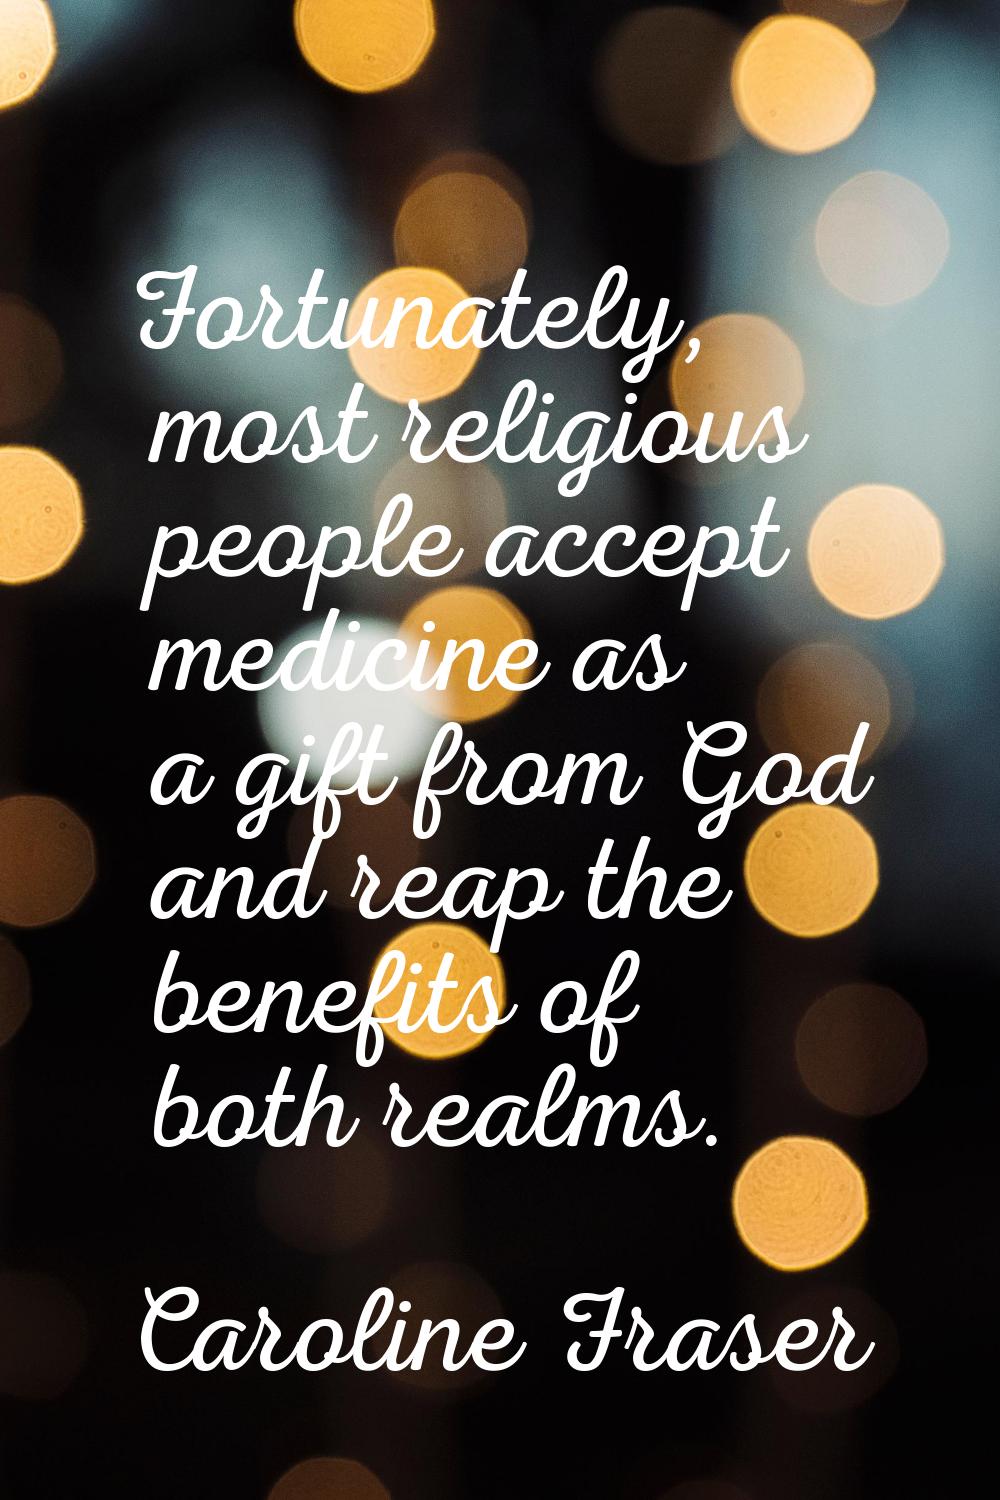 Fortunately, most religious people accept medicine as a gift from God and reap the benefits of both